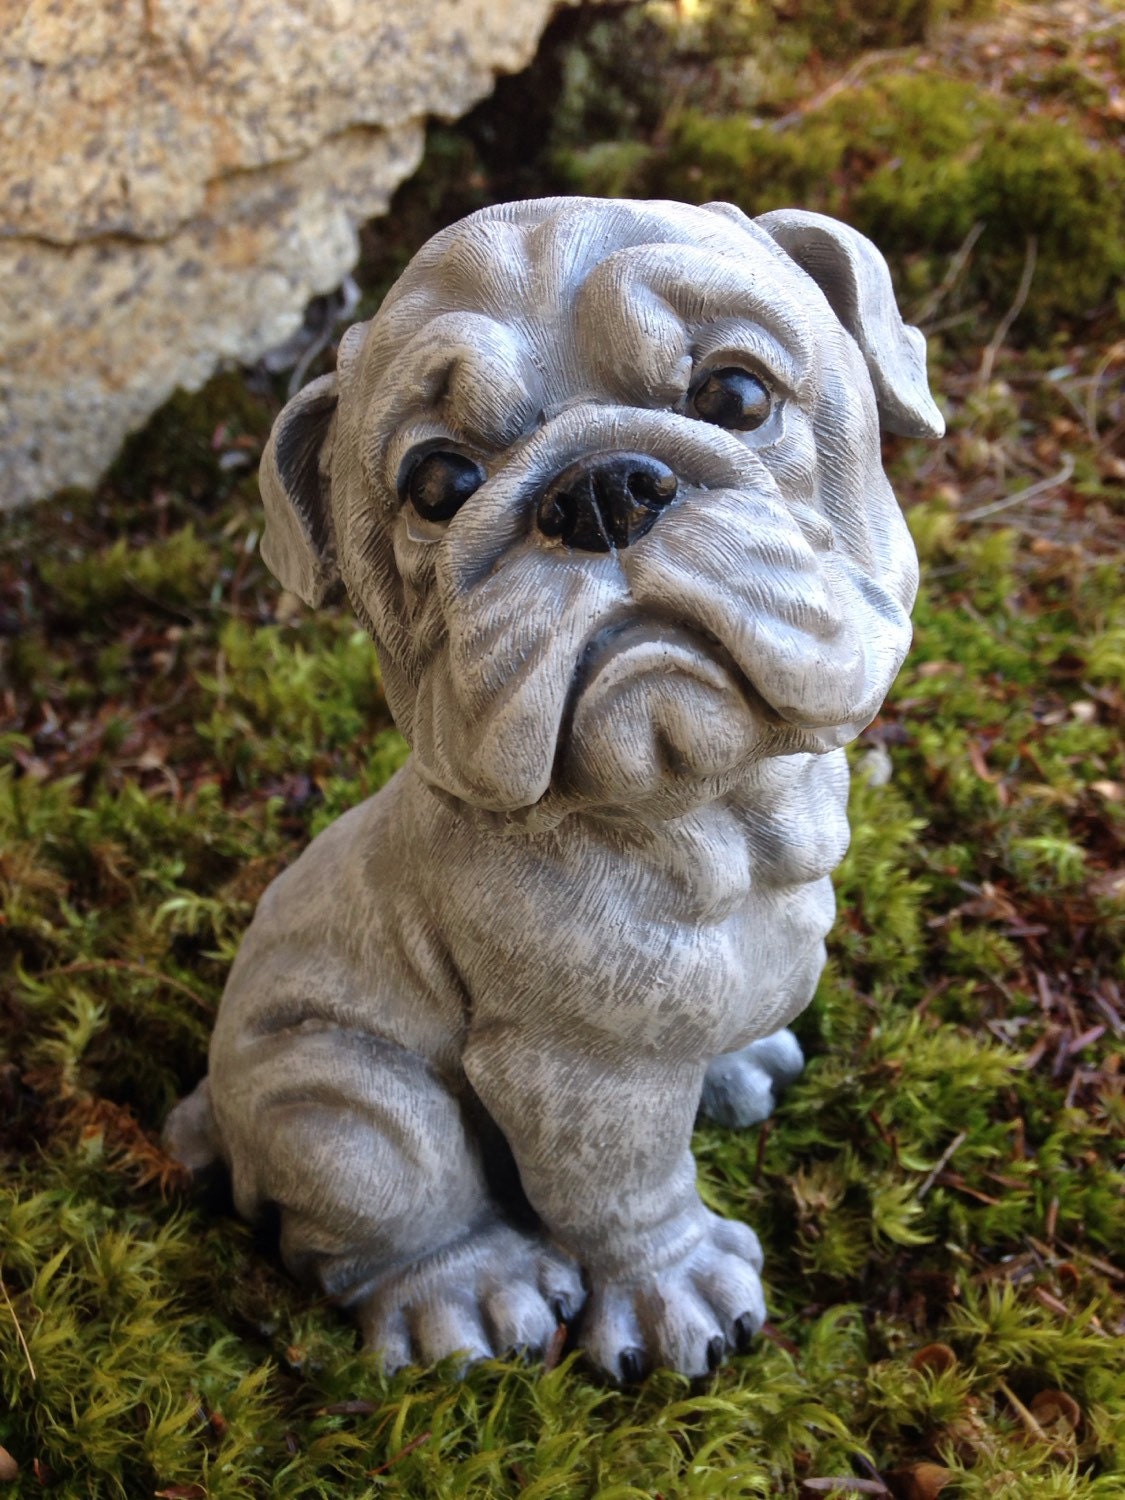 Top English Bulldog Statue in the world The ultimate guide 